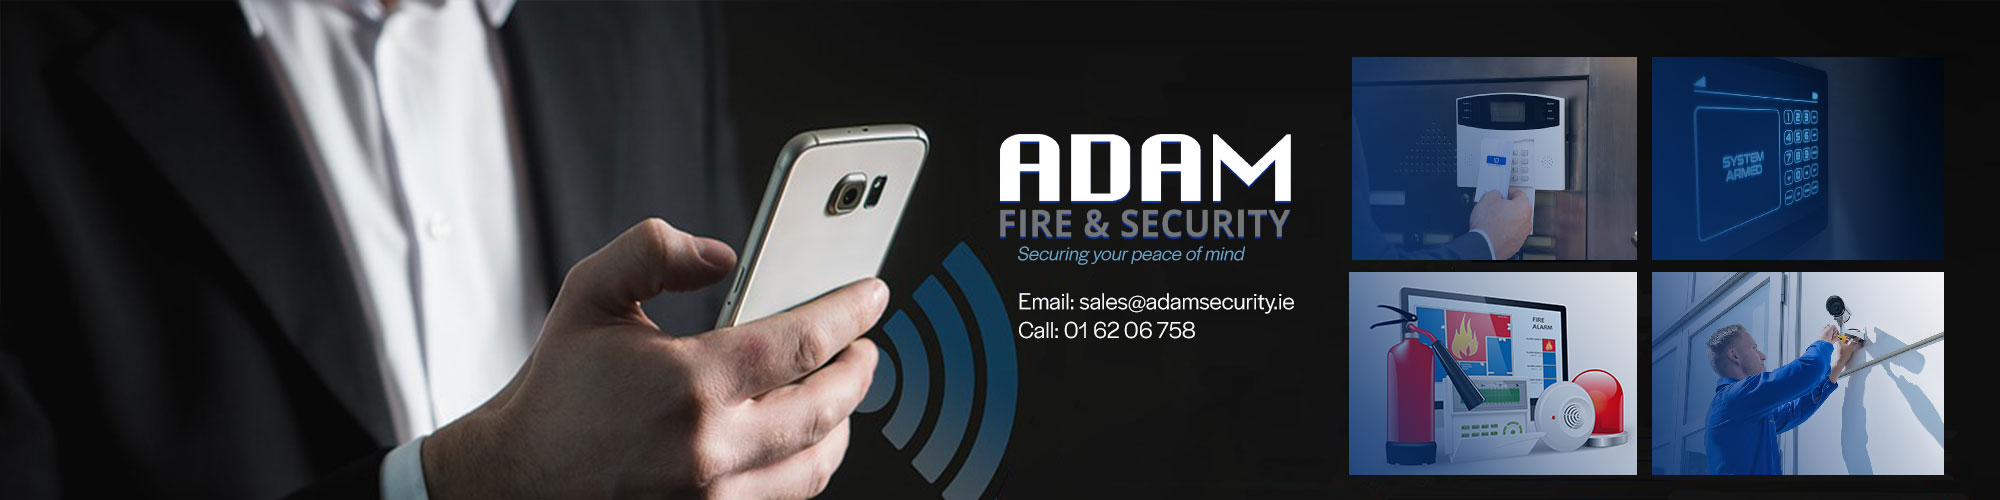 ADAM Fire and Security - ELECTRONIC SECURITY SPECIALISTS